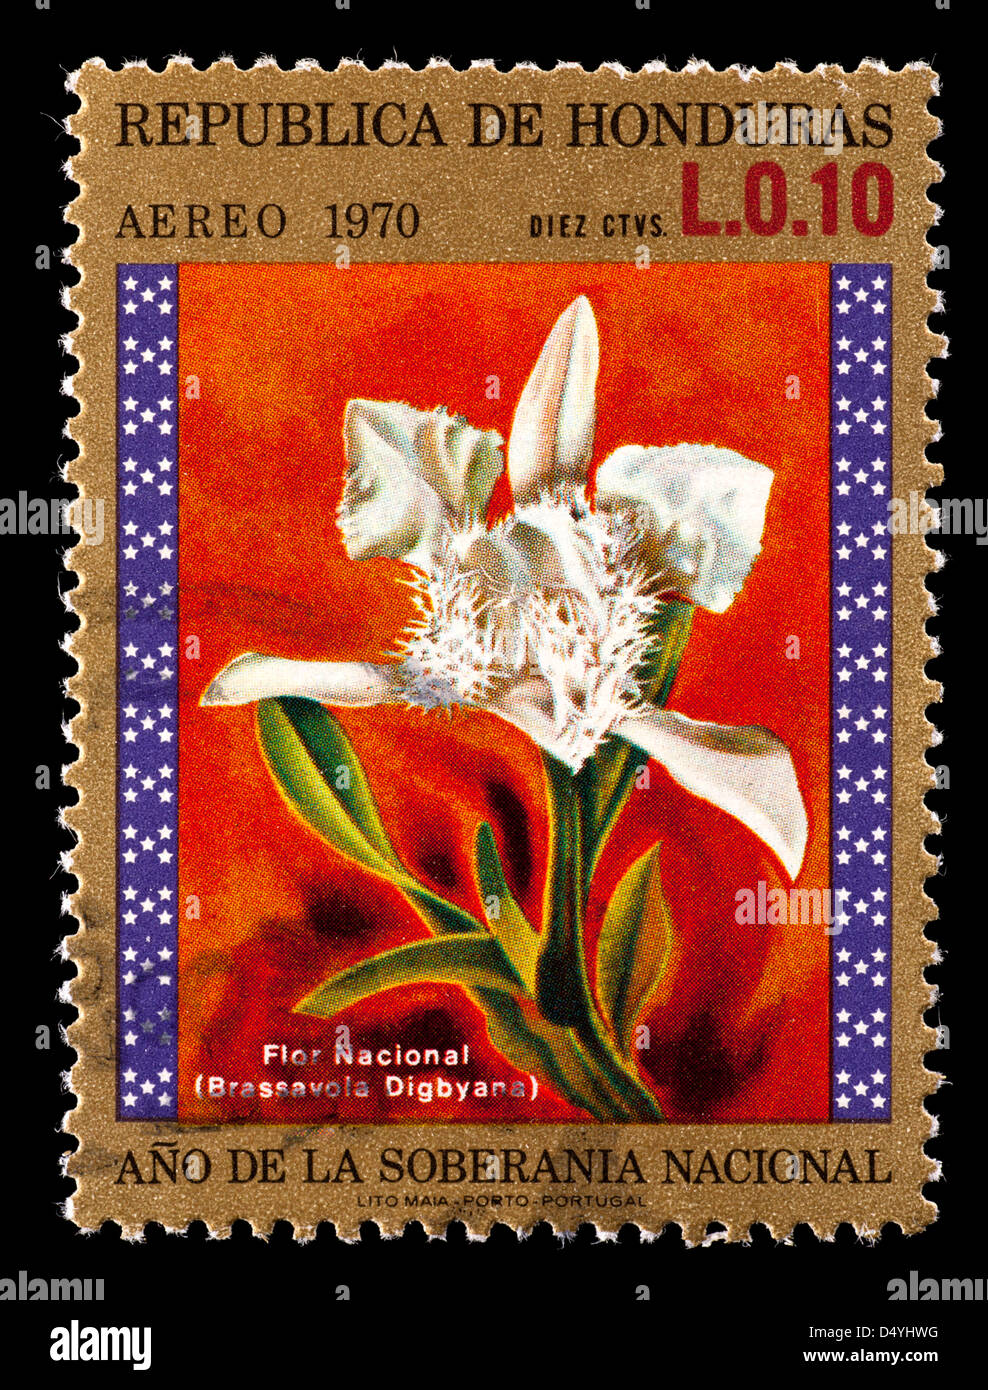 Postage stamp from Honduras depicting the national flower, an orchid (Brassavola digbiana). Stock Photo